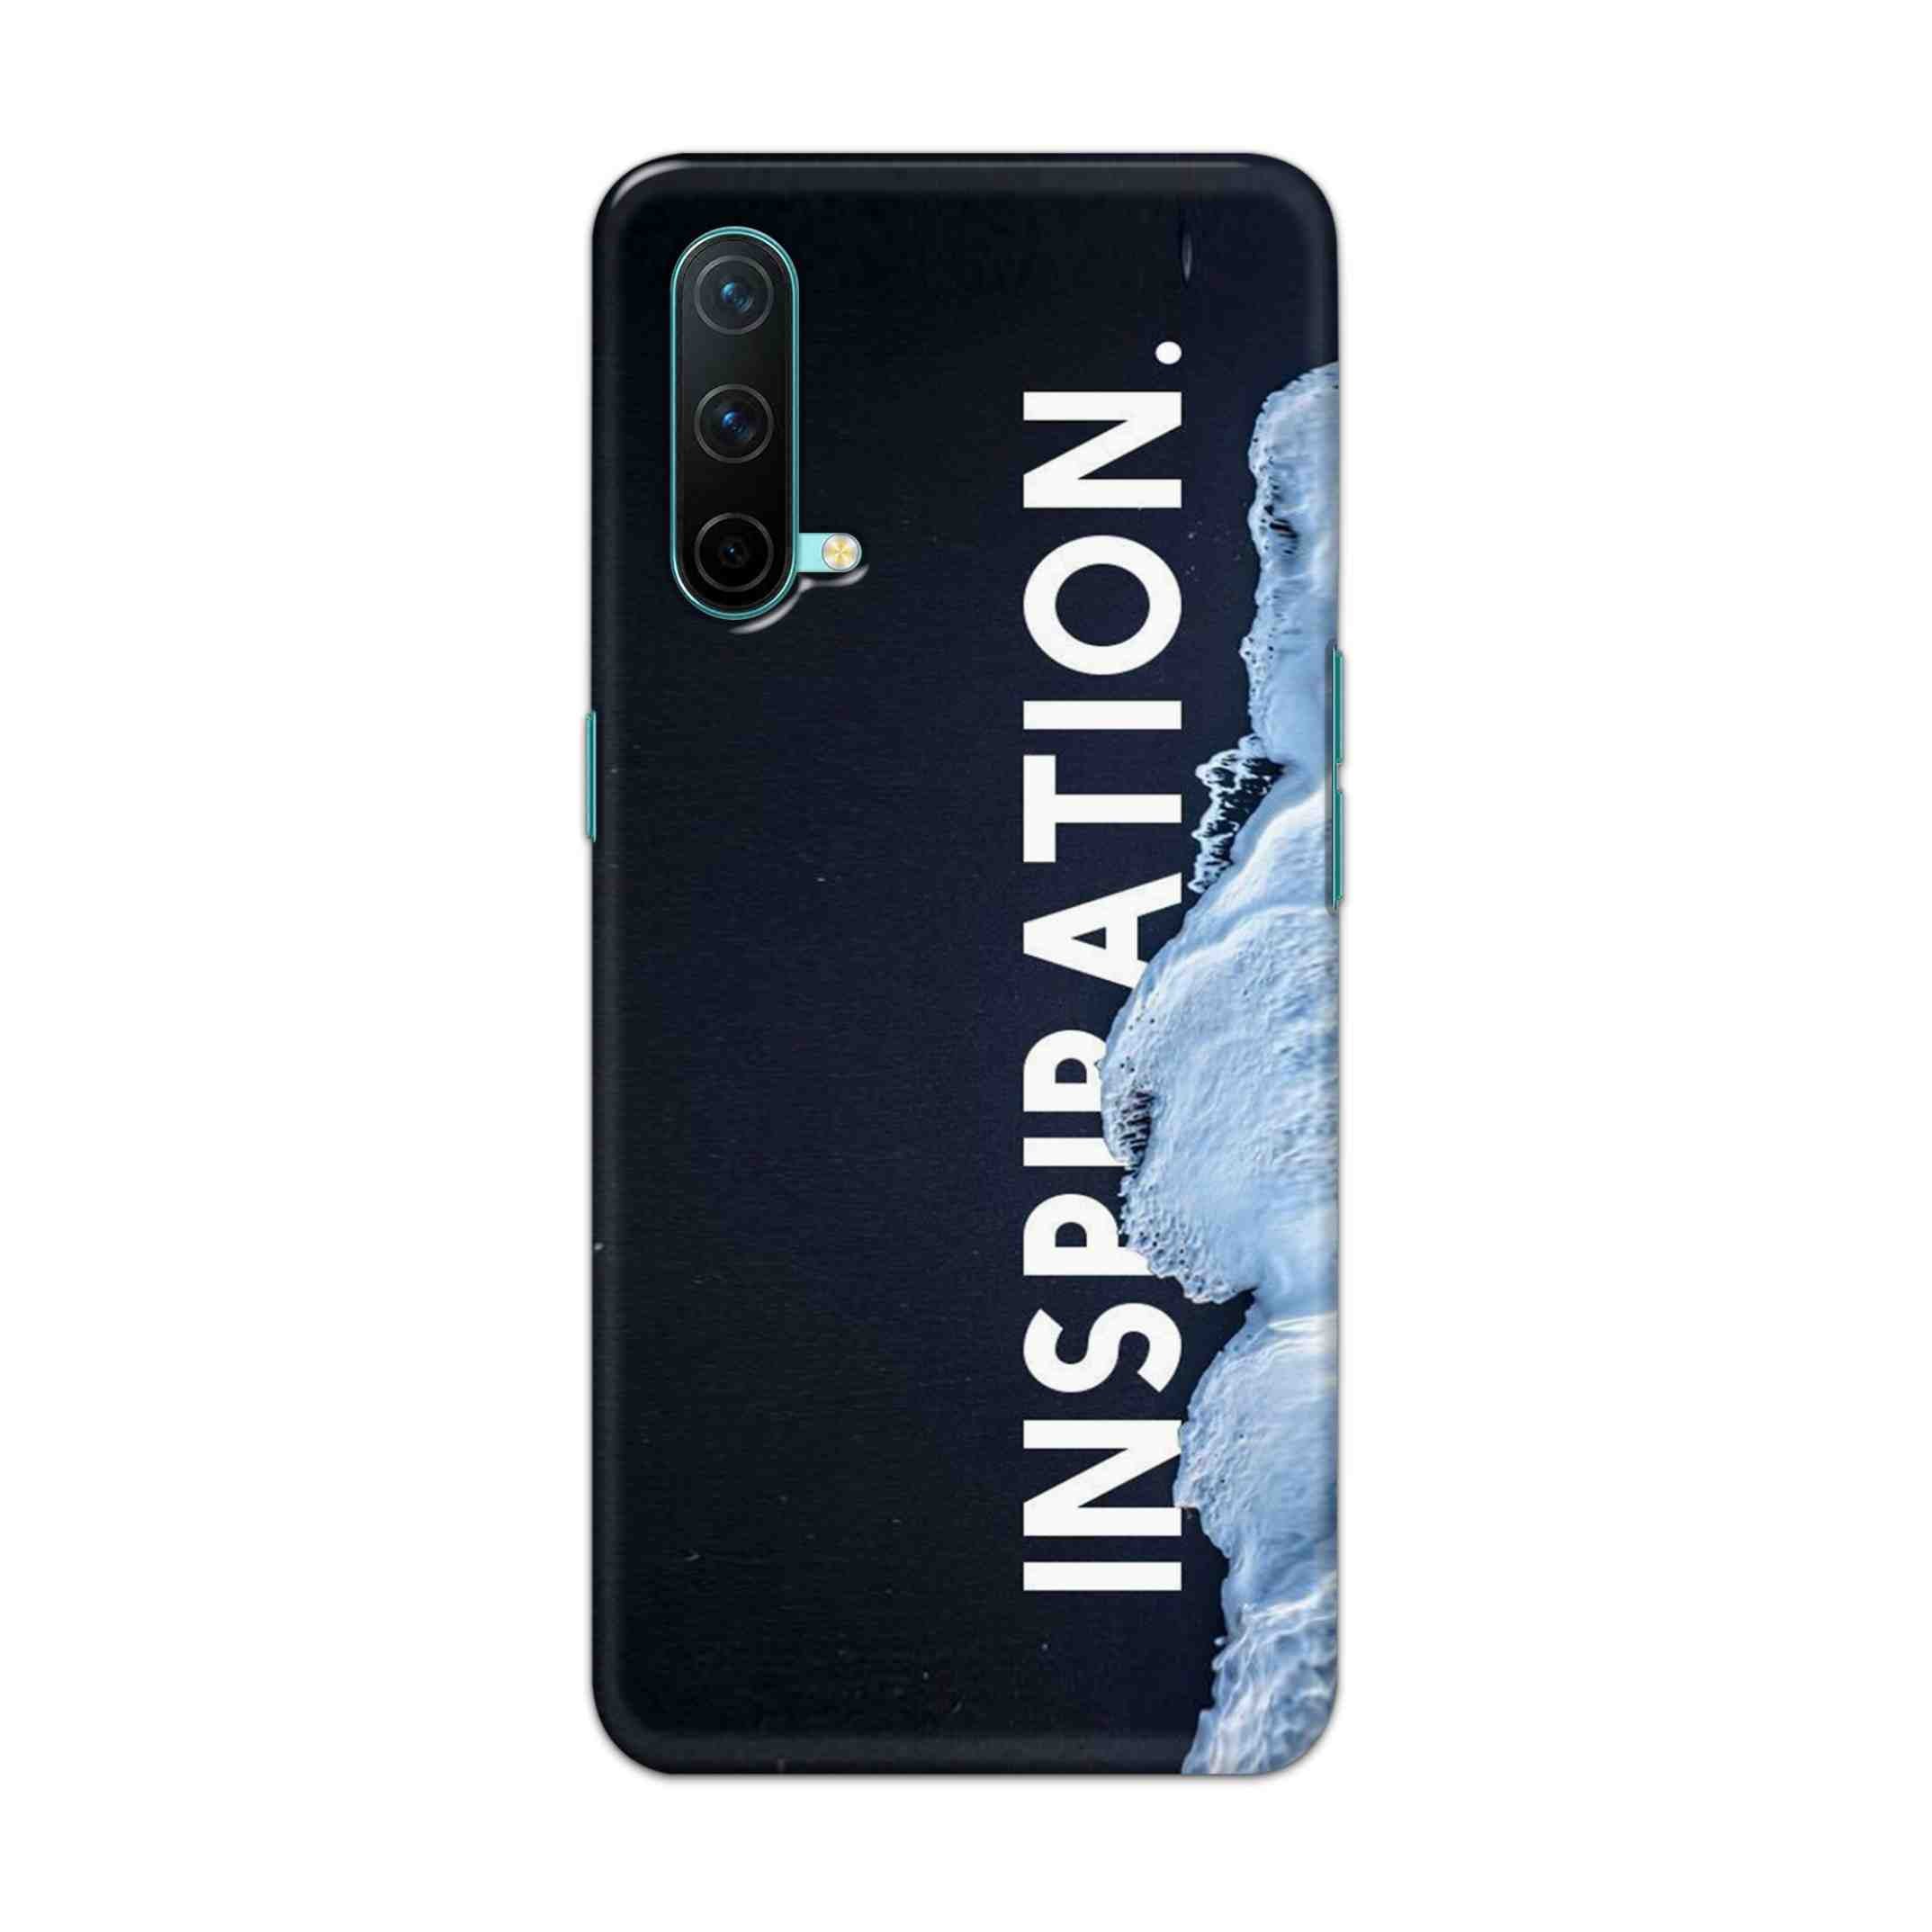 Buy Inspiration Hard Back Mobile Phone Case Cover For OnePlus Nord CE Online